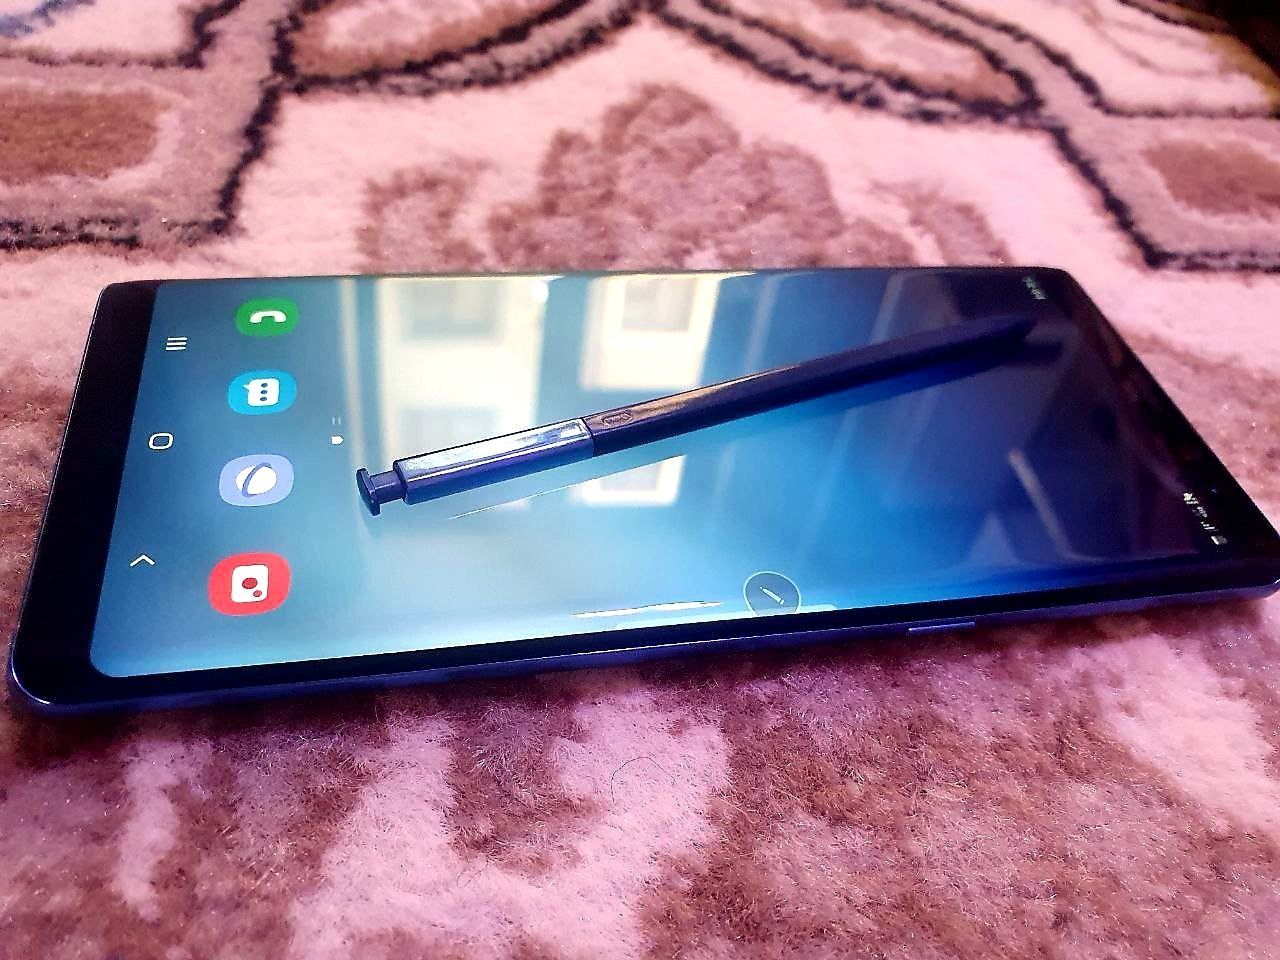 Samsung note 8 ideal